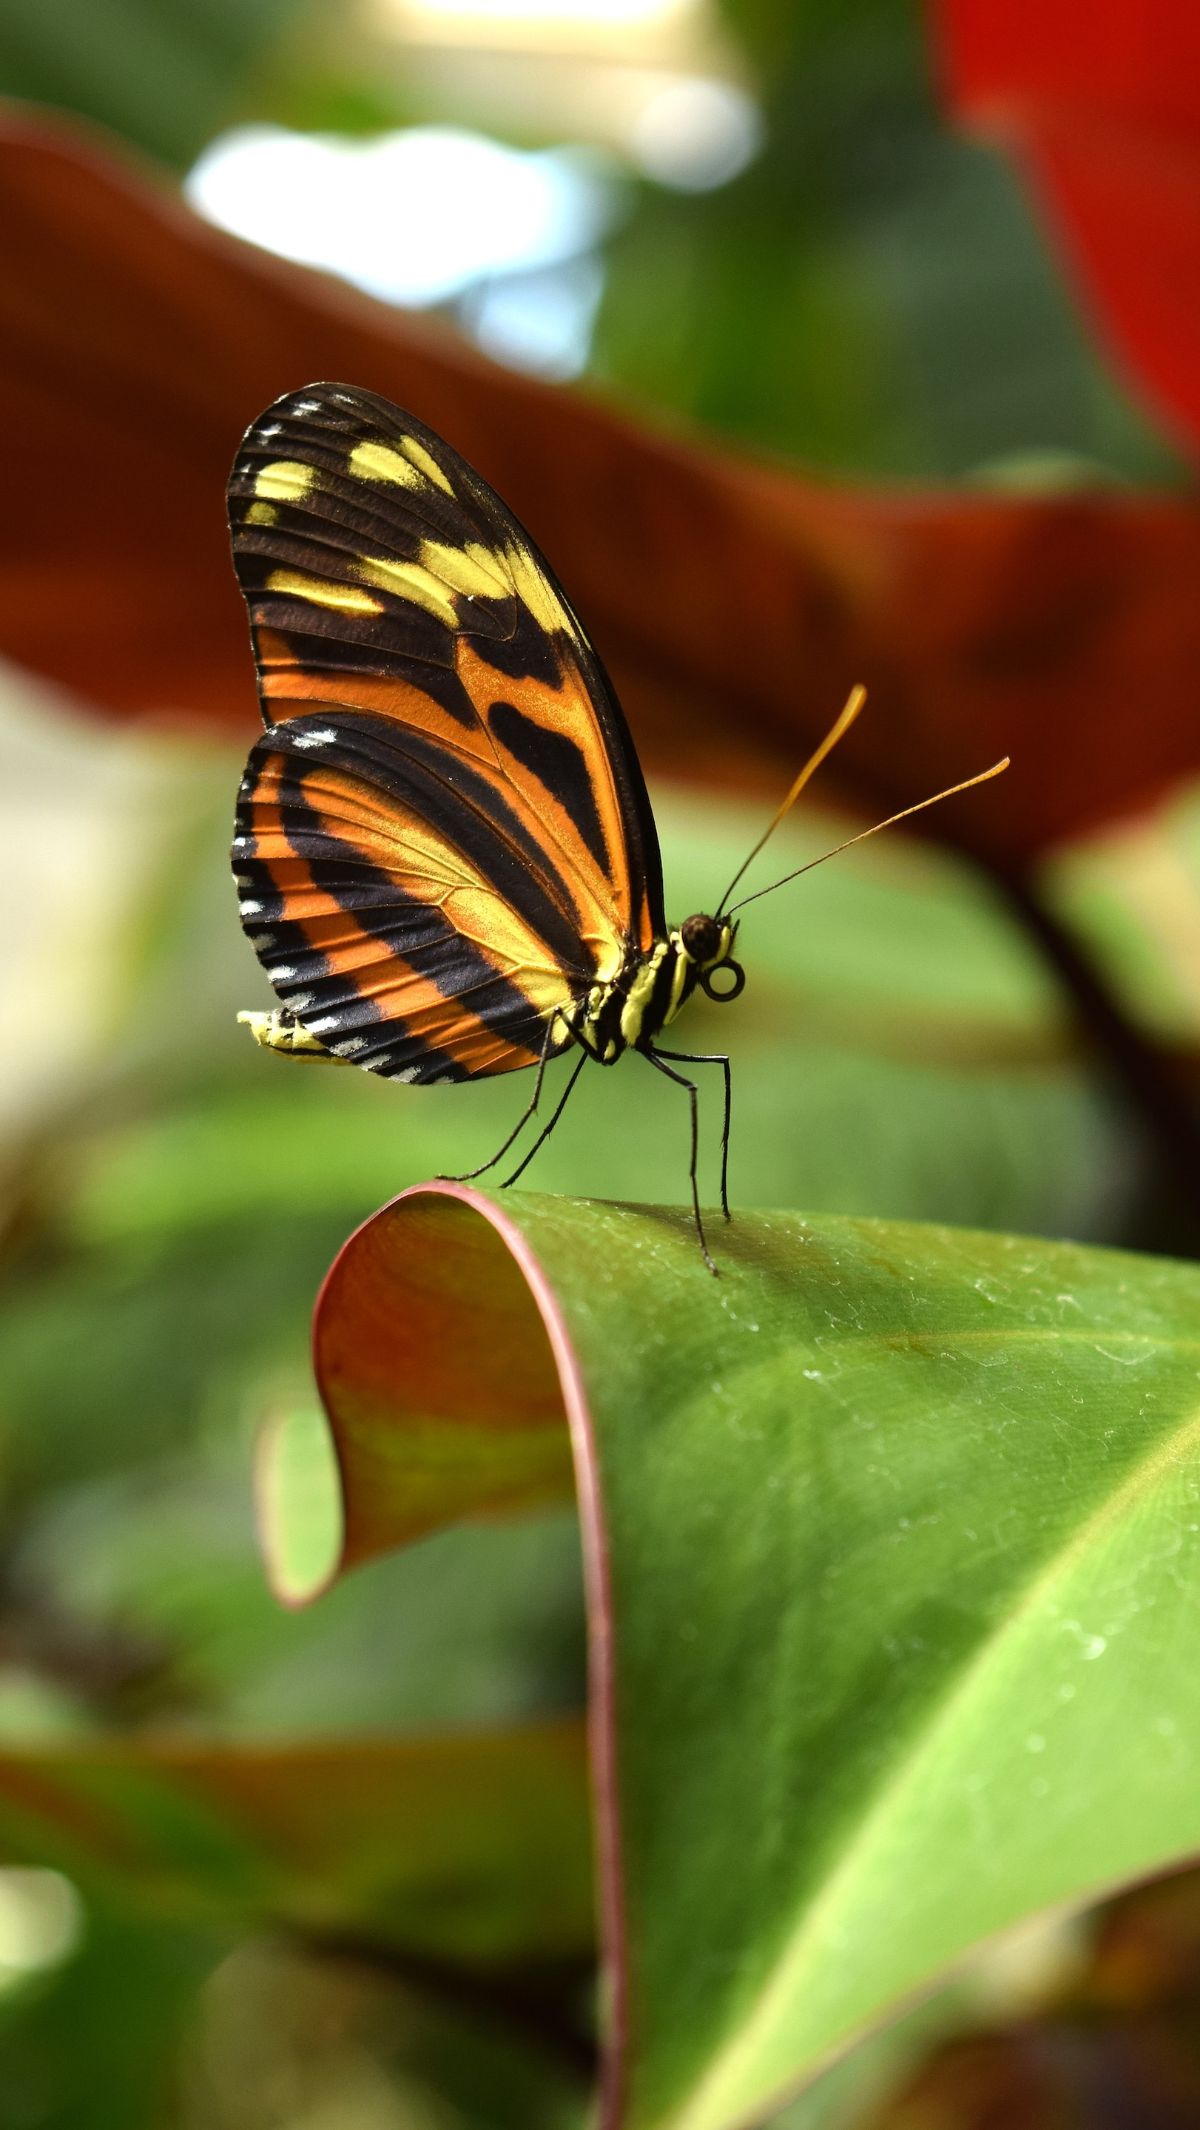 Butterfly Quotes: 50 Inspirational Phrases for a Renewed Life